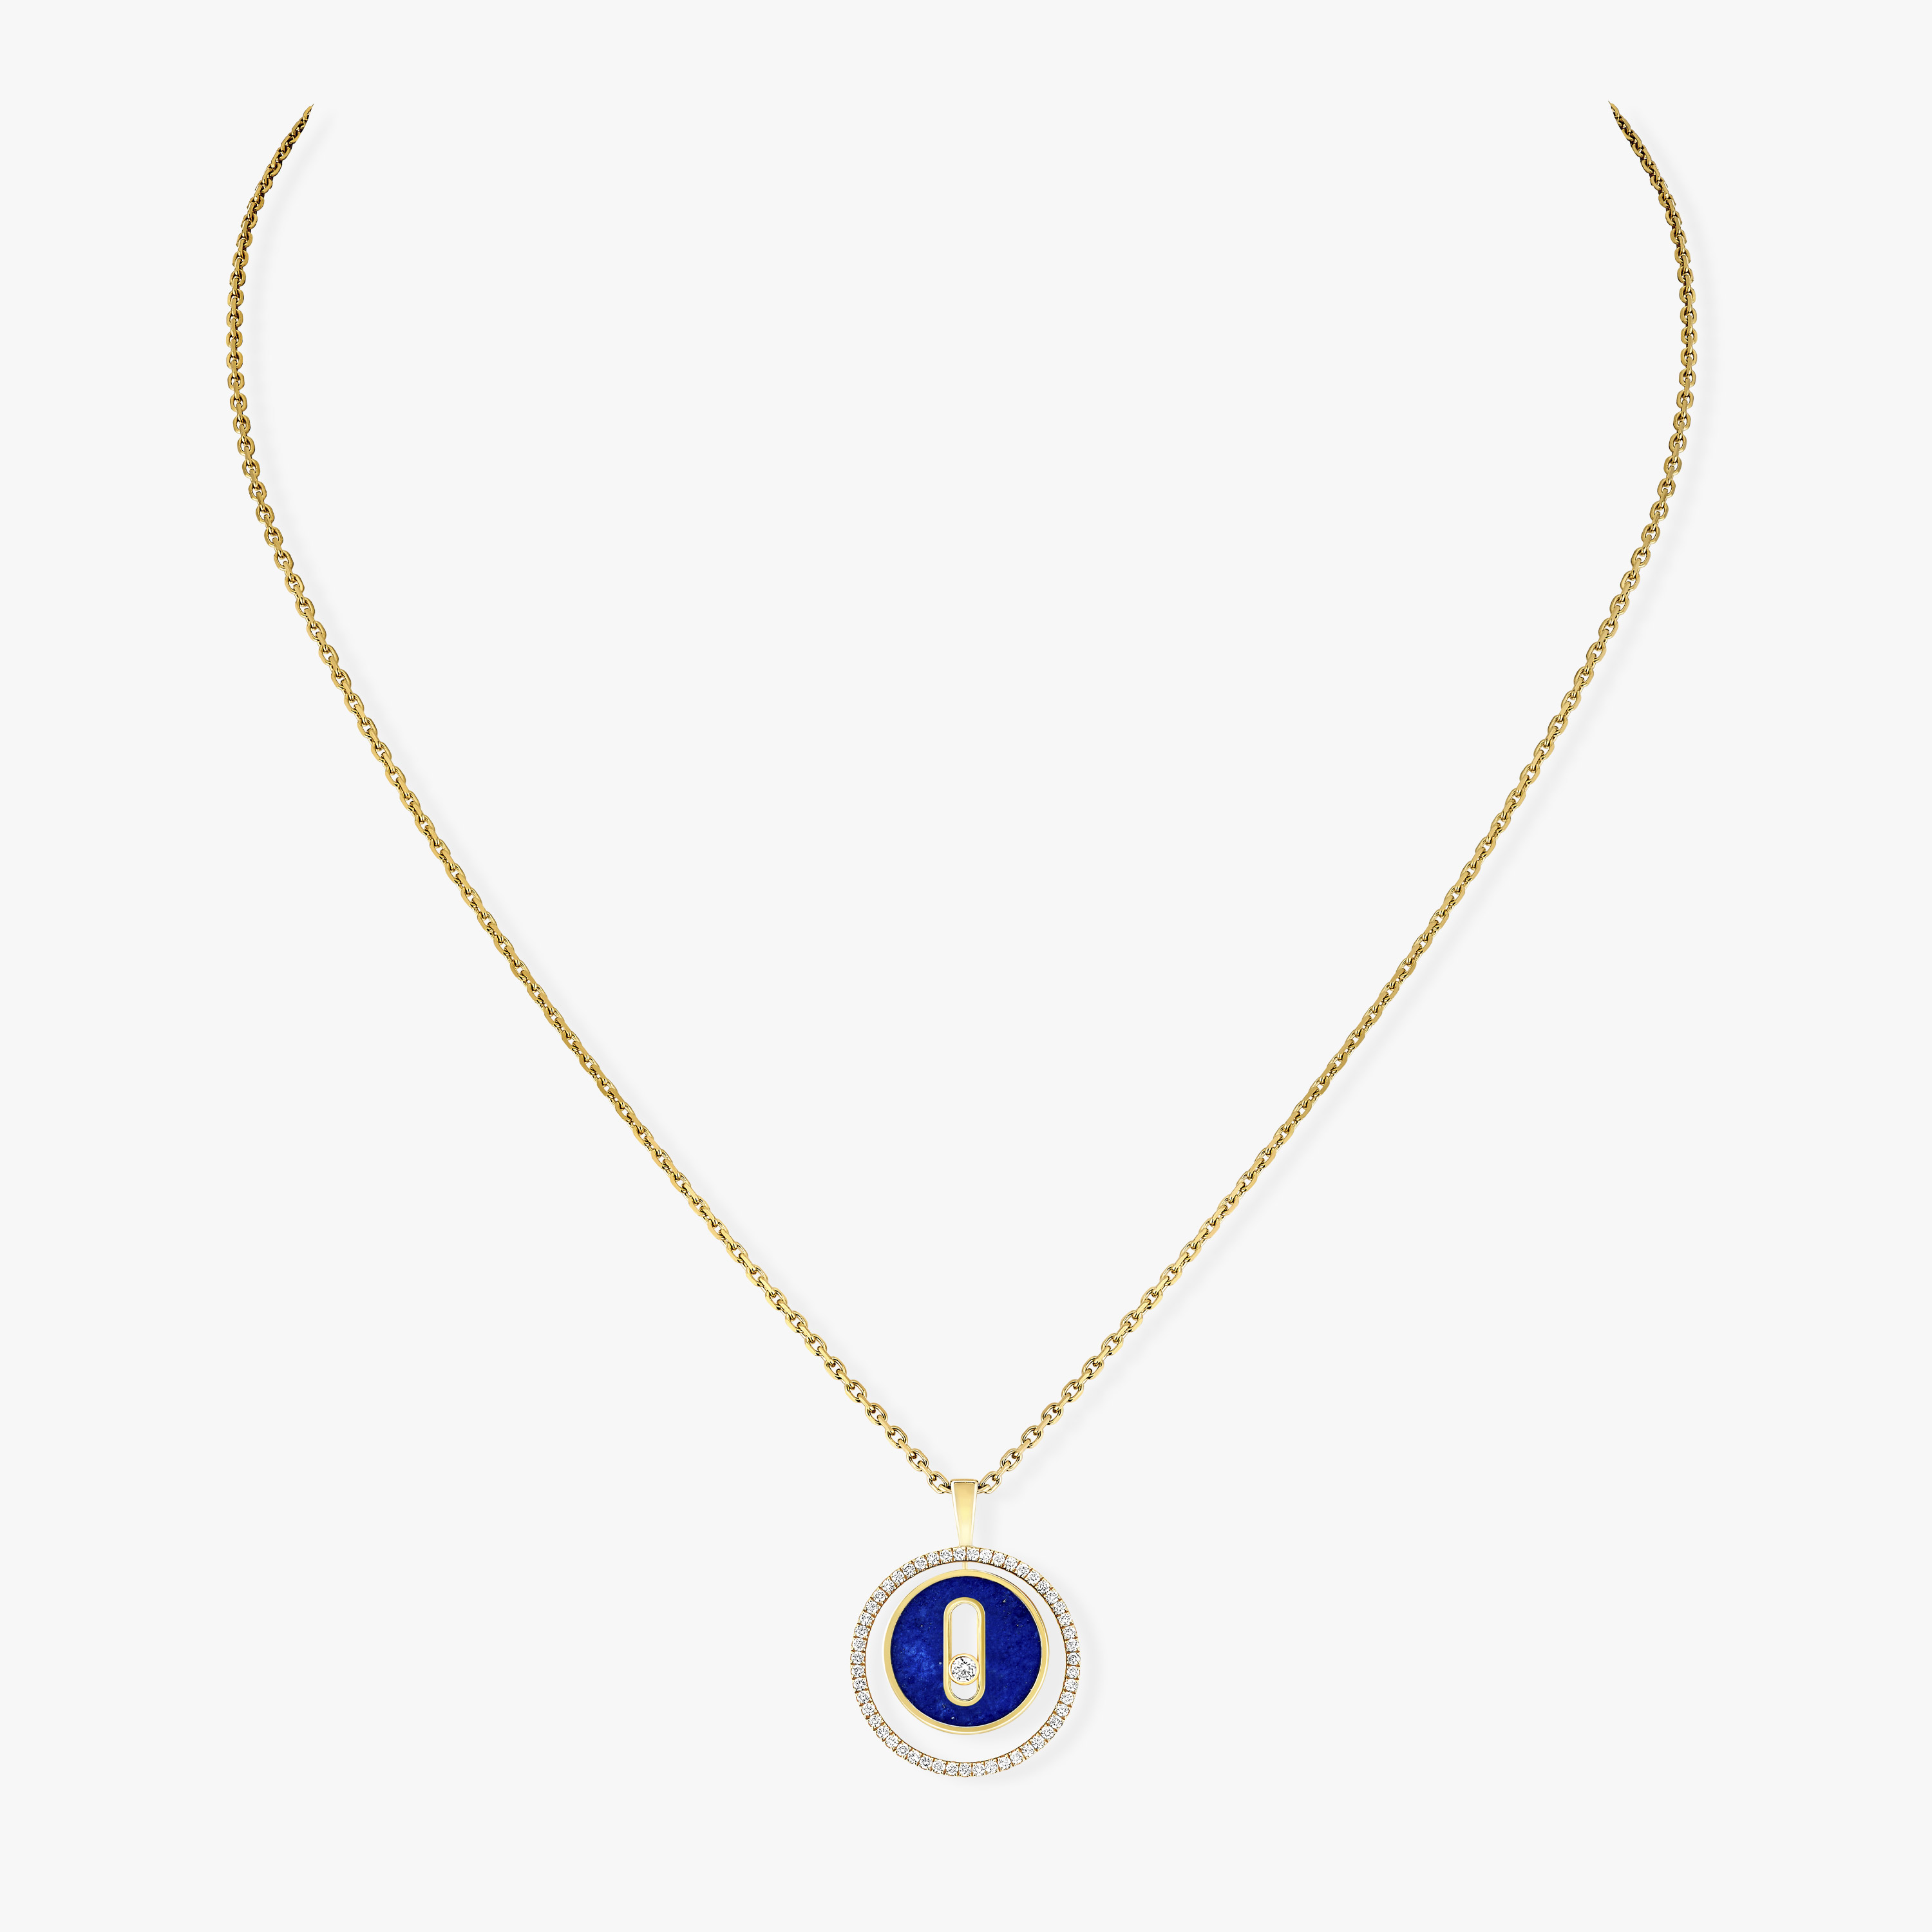 Lucky Move SM Lapis Lazuli Necklace Yellow Gold For Her Diamond Necklace 11978-YG